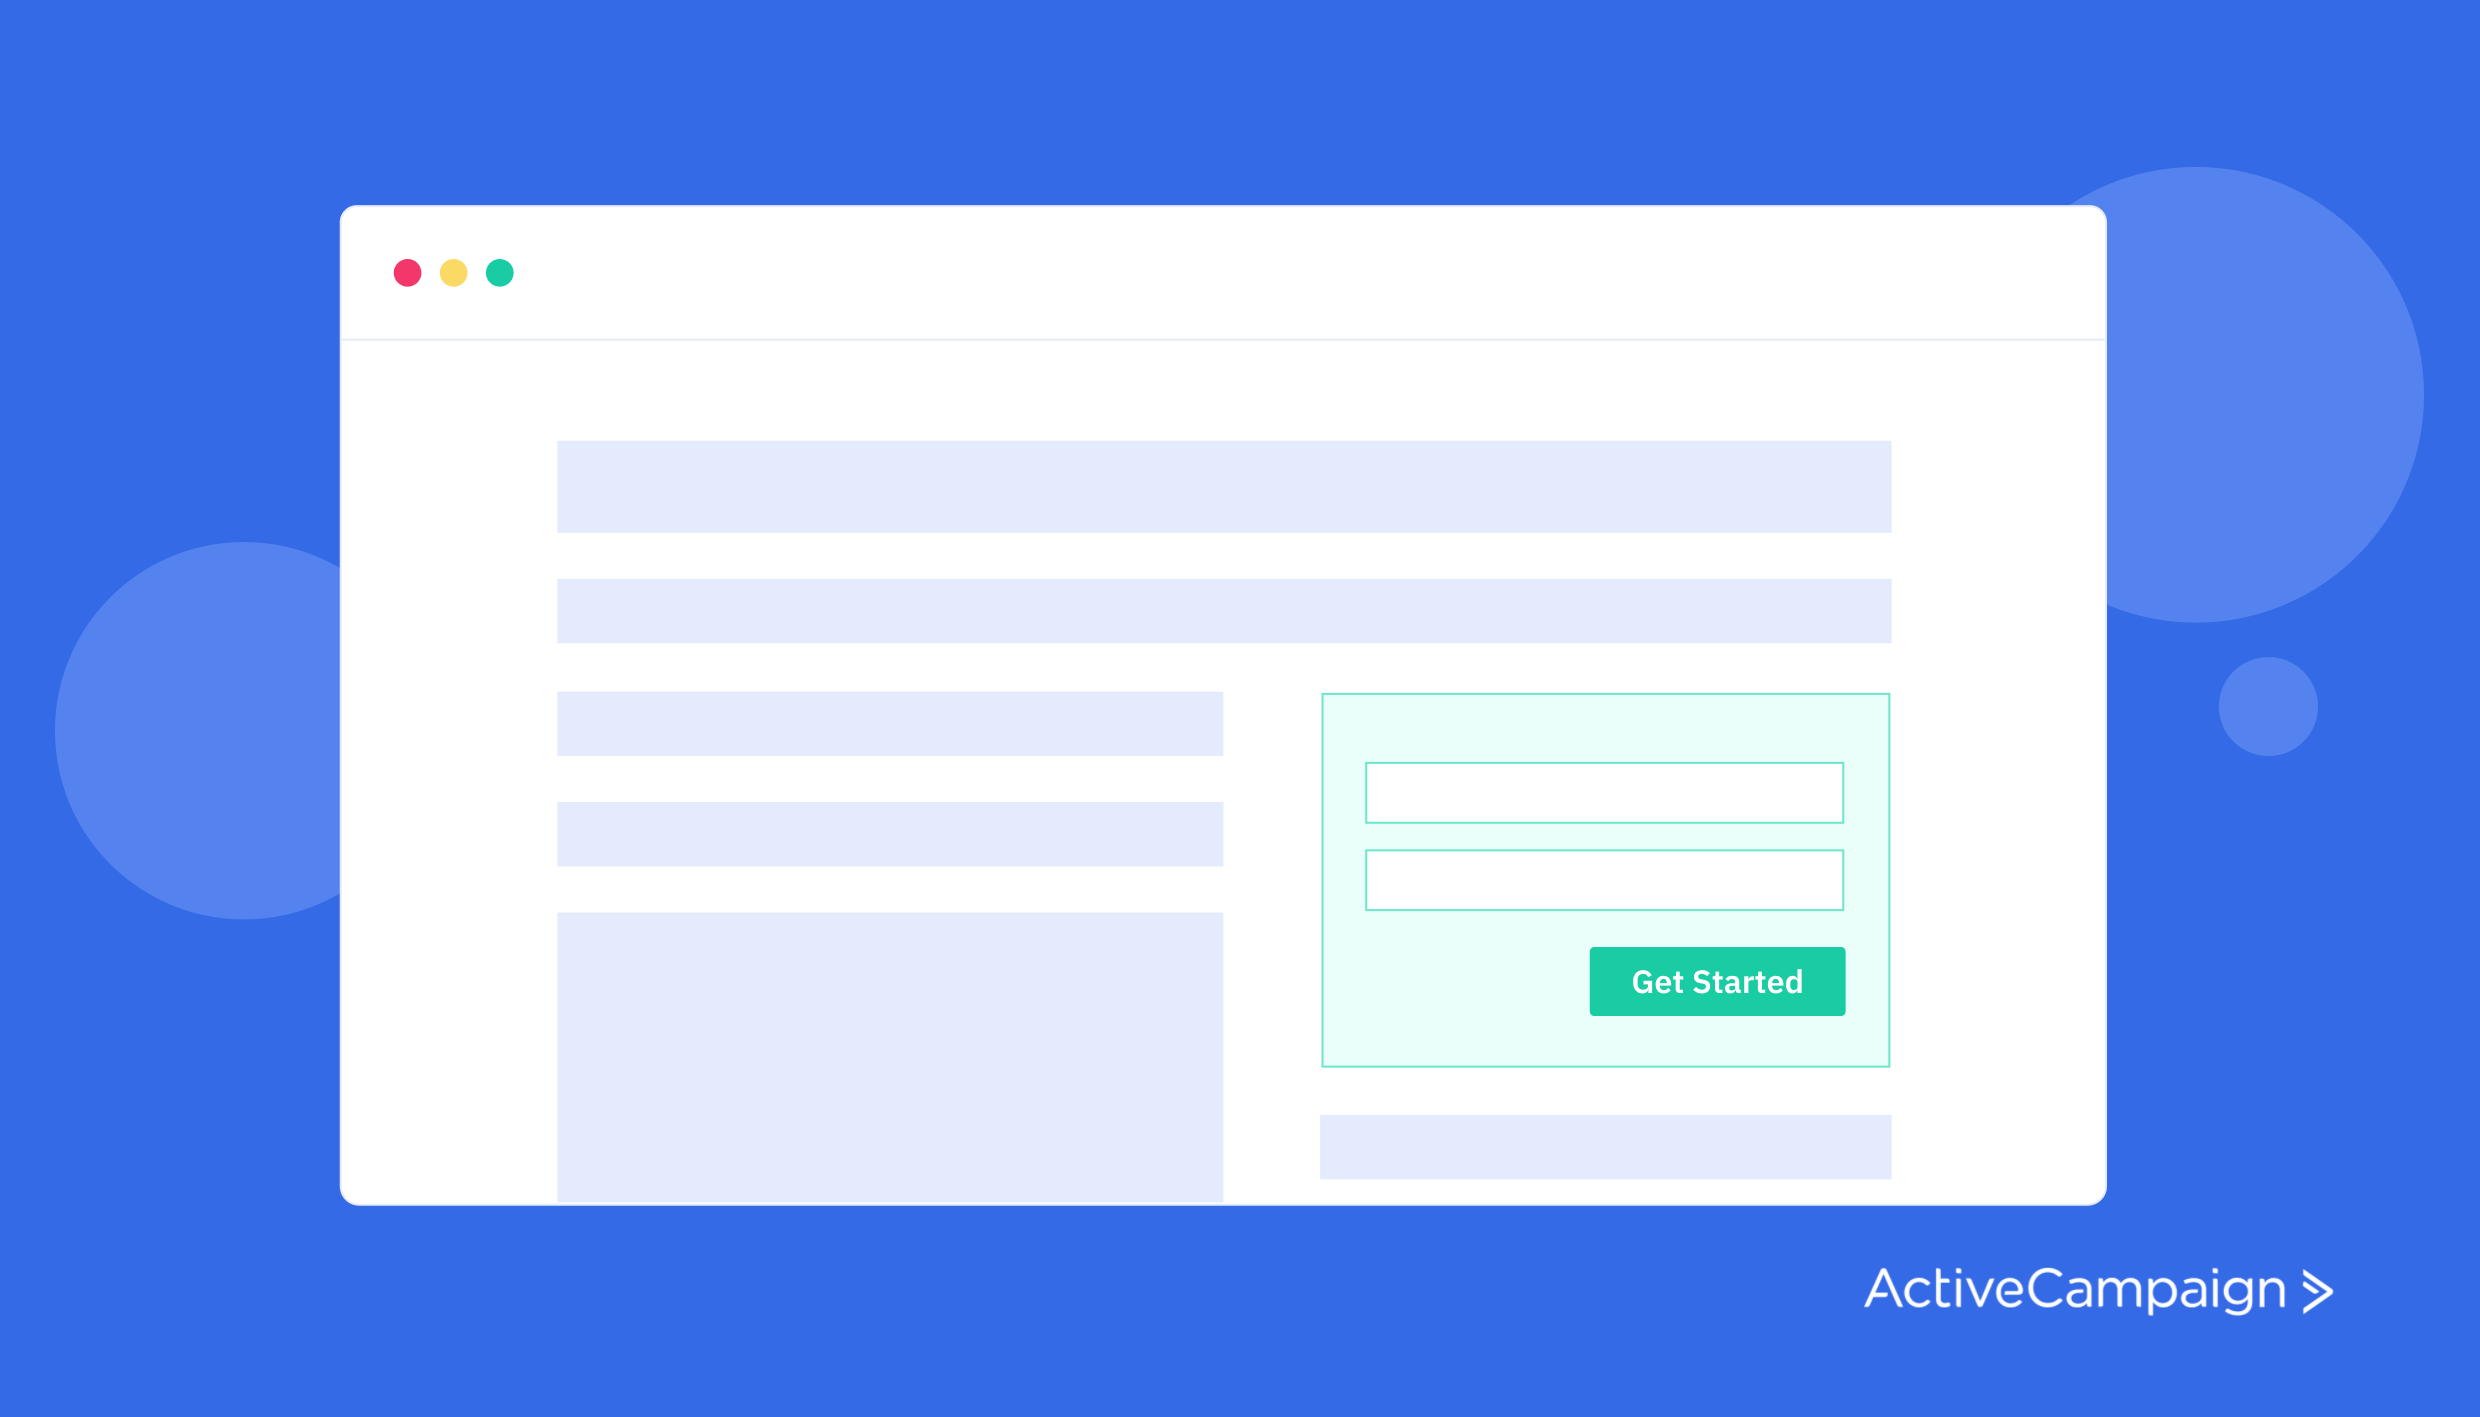 Build a high-quality email list with opt-ins